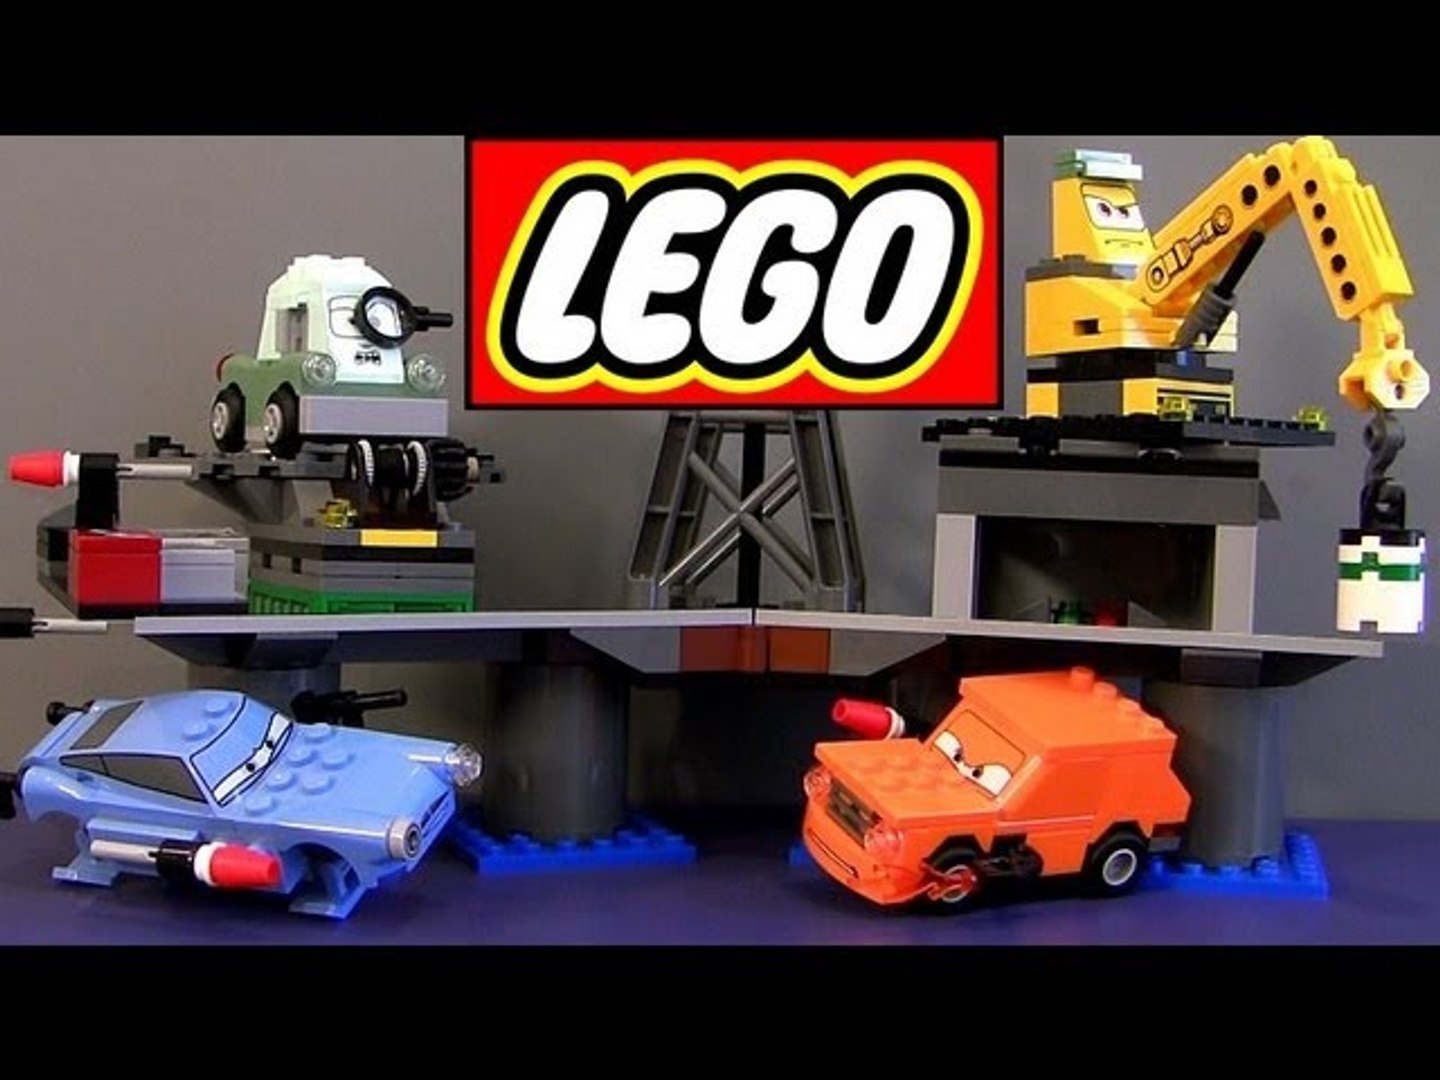 Cars 2 Oil Rig Escape 9486 Disney Buildable toys review Finn McMissile - video Dailymotion